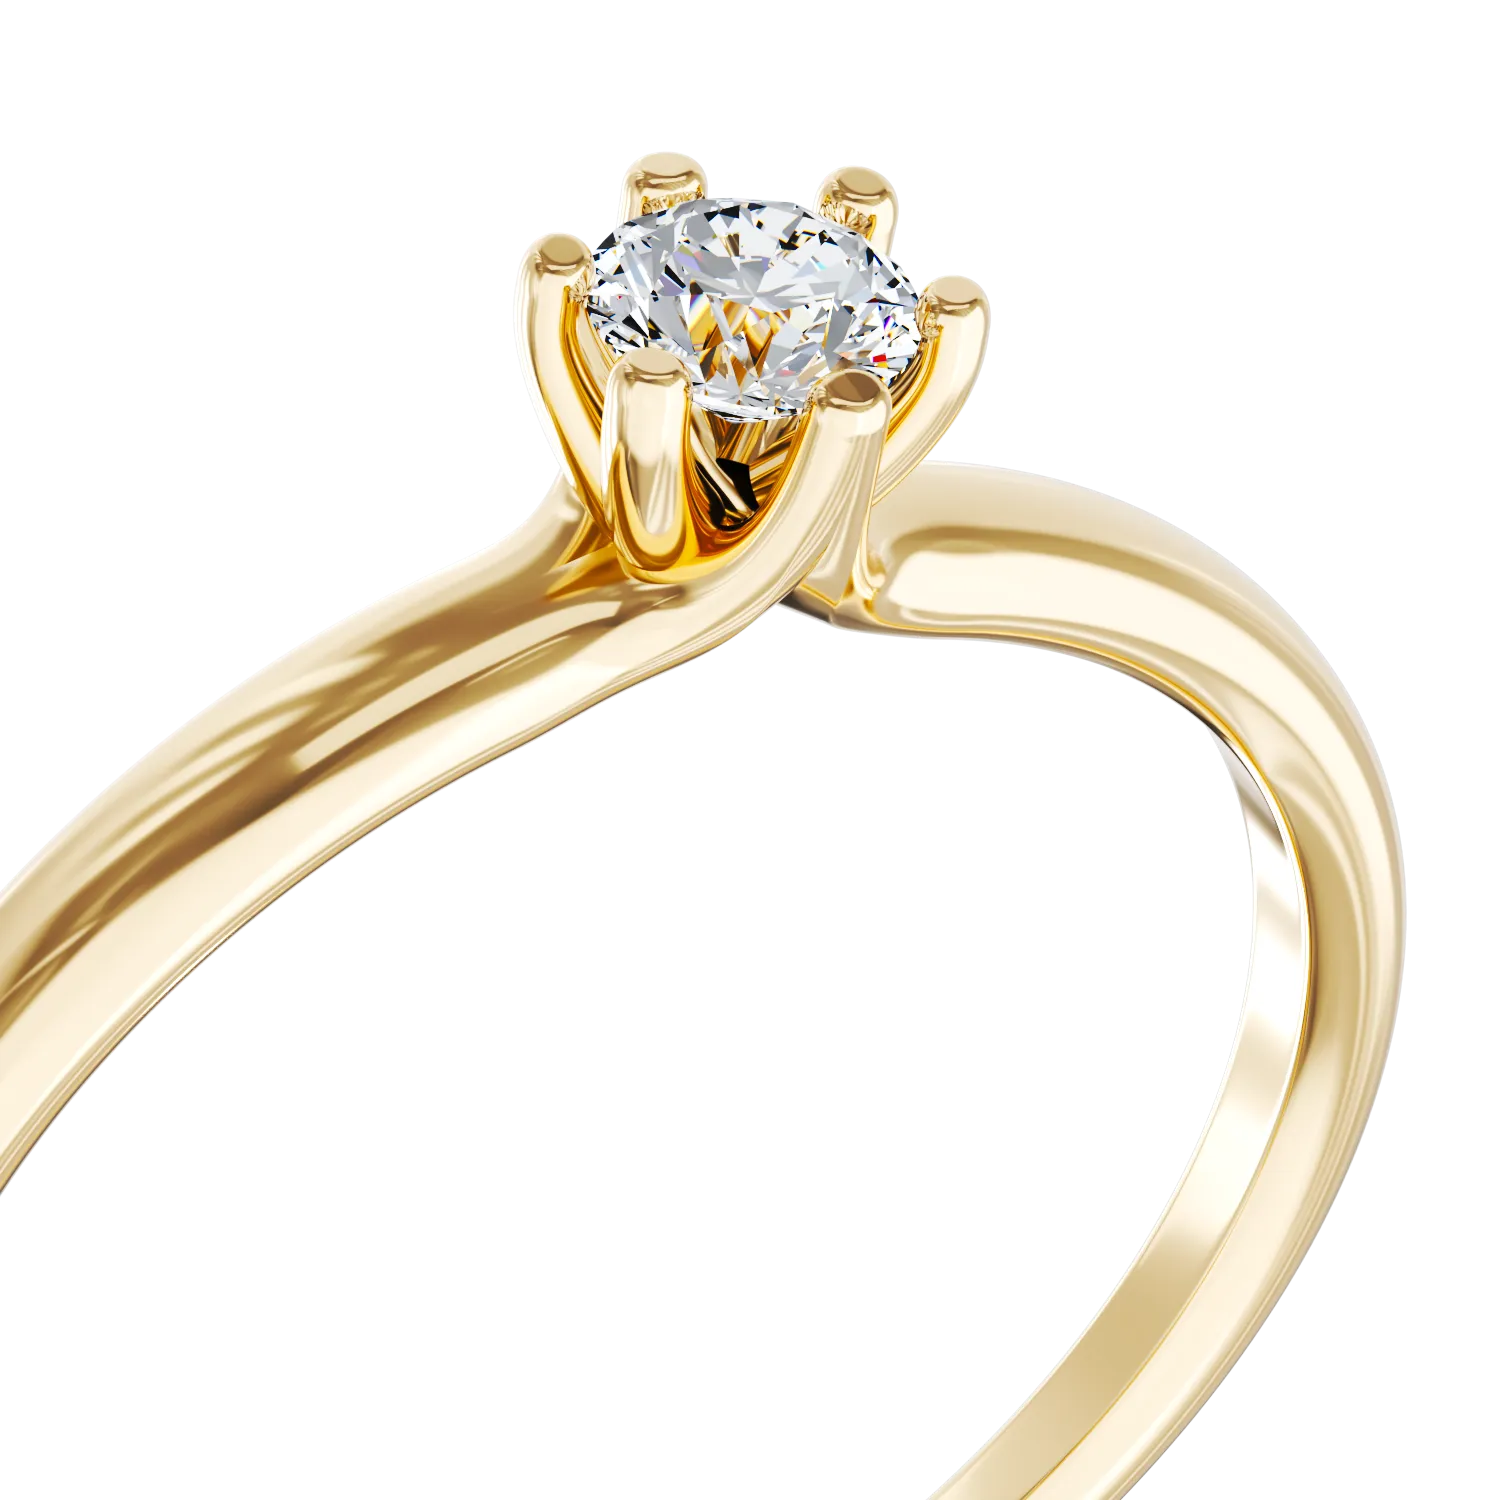 18K yellow gold engagement ring with a 0.21ct solitaire diamond